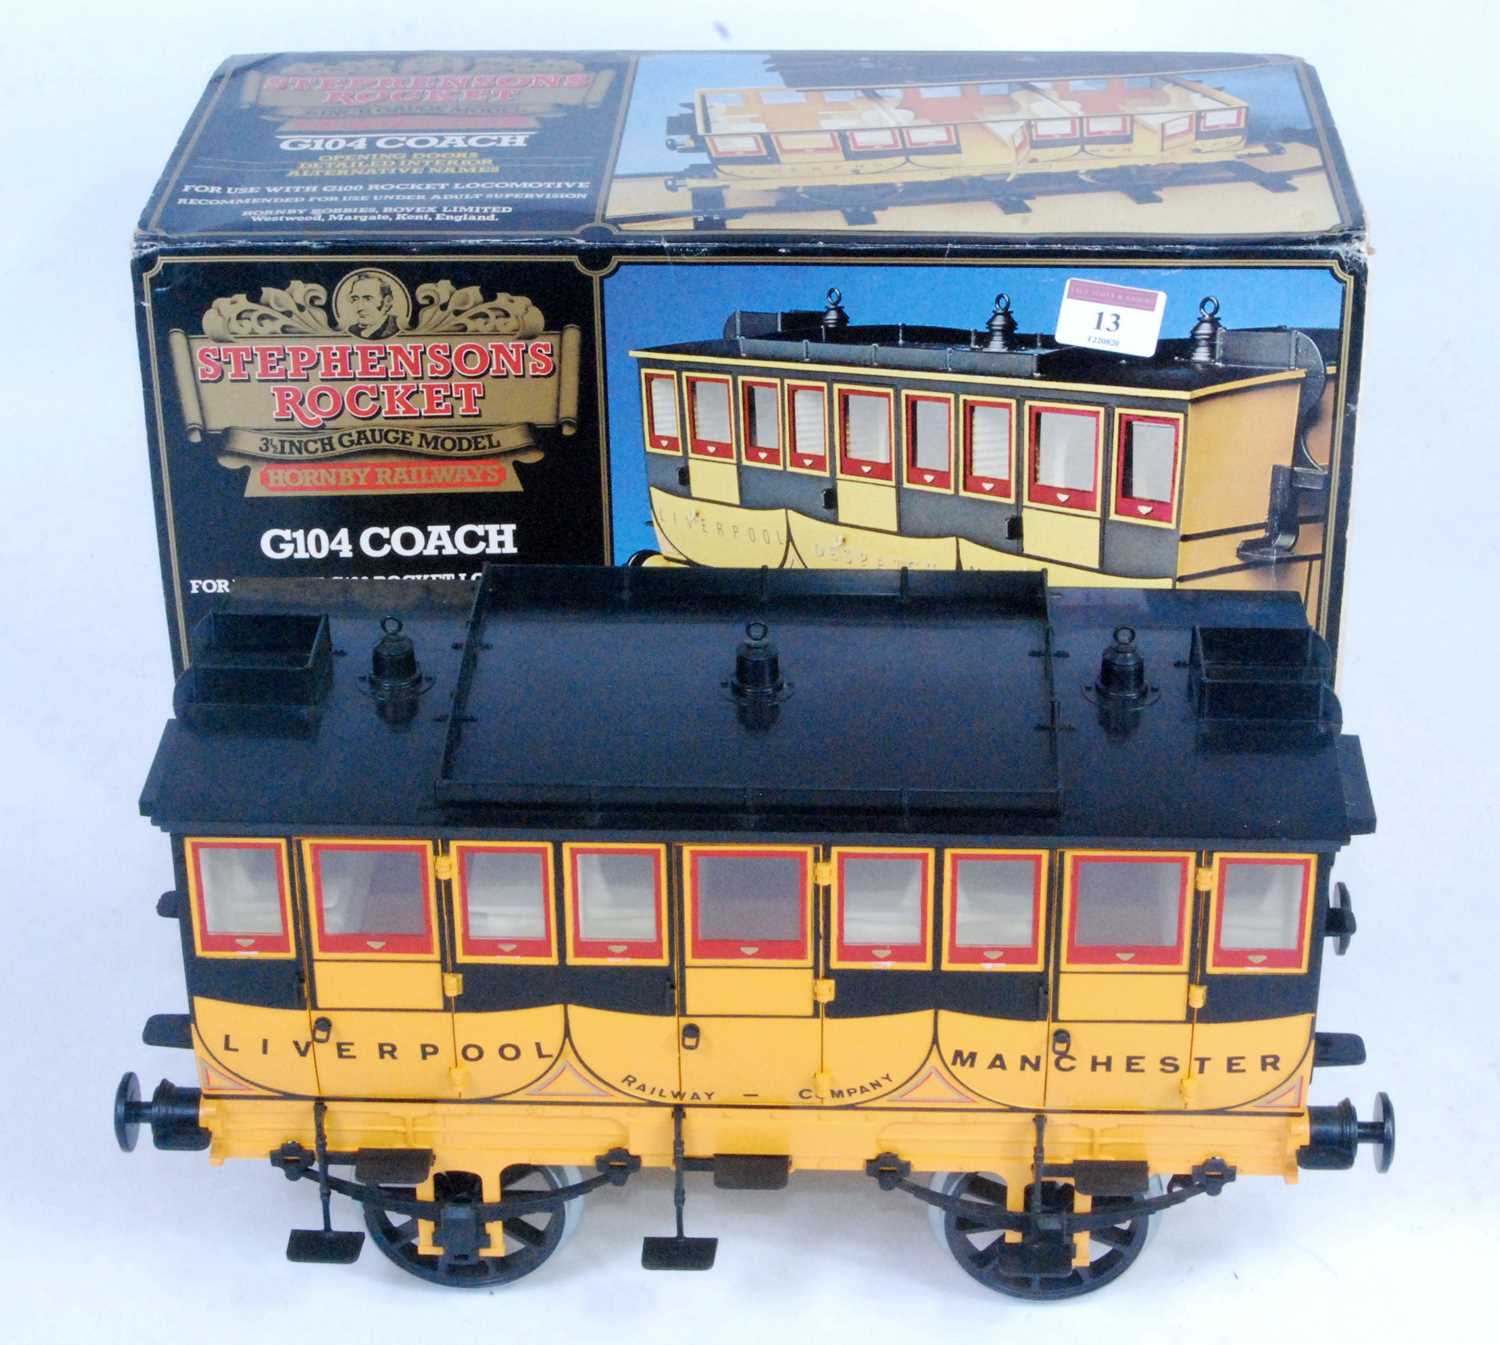 A Hornby G104 coach for Rocket locomotive, appears unused and complete with name transfers